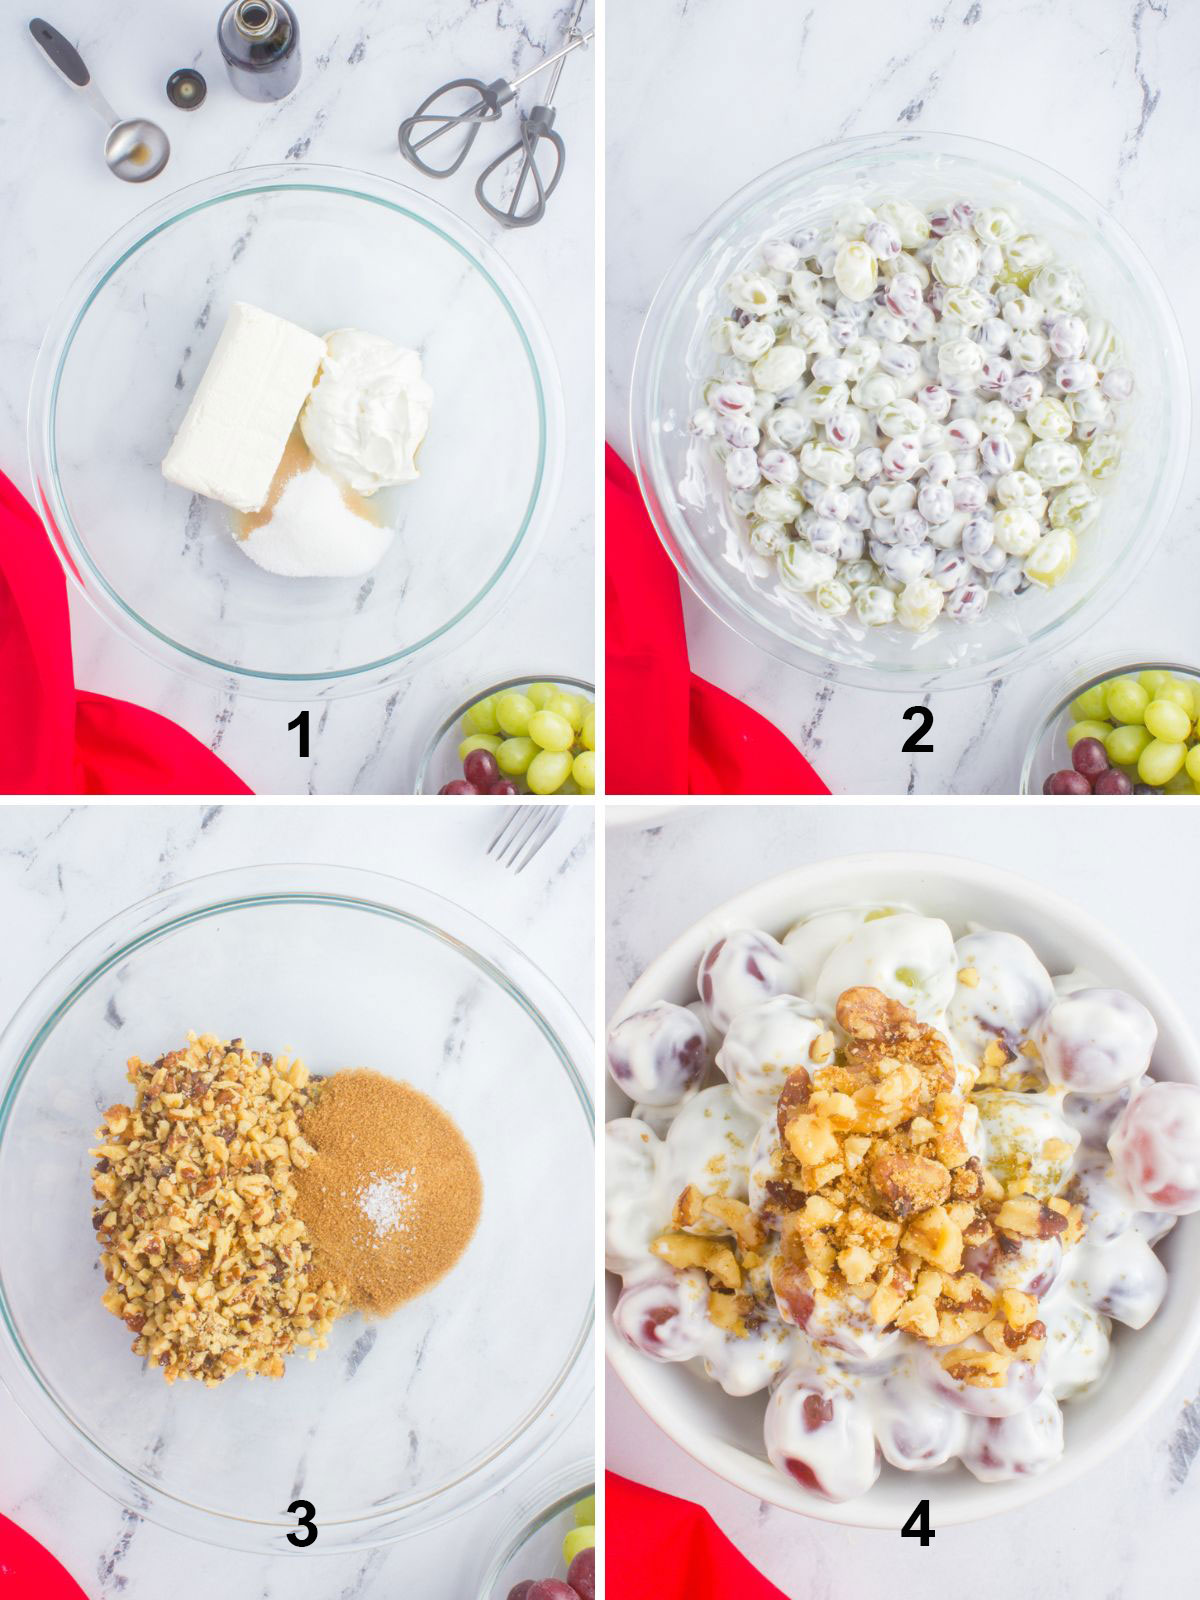 cream cheese in bowl, creamy grapes, brown sugar and nuts, grape salad with nuts